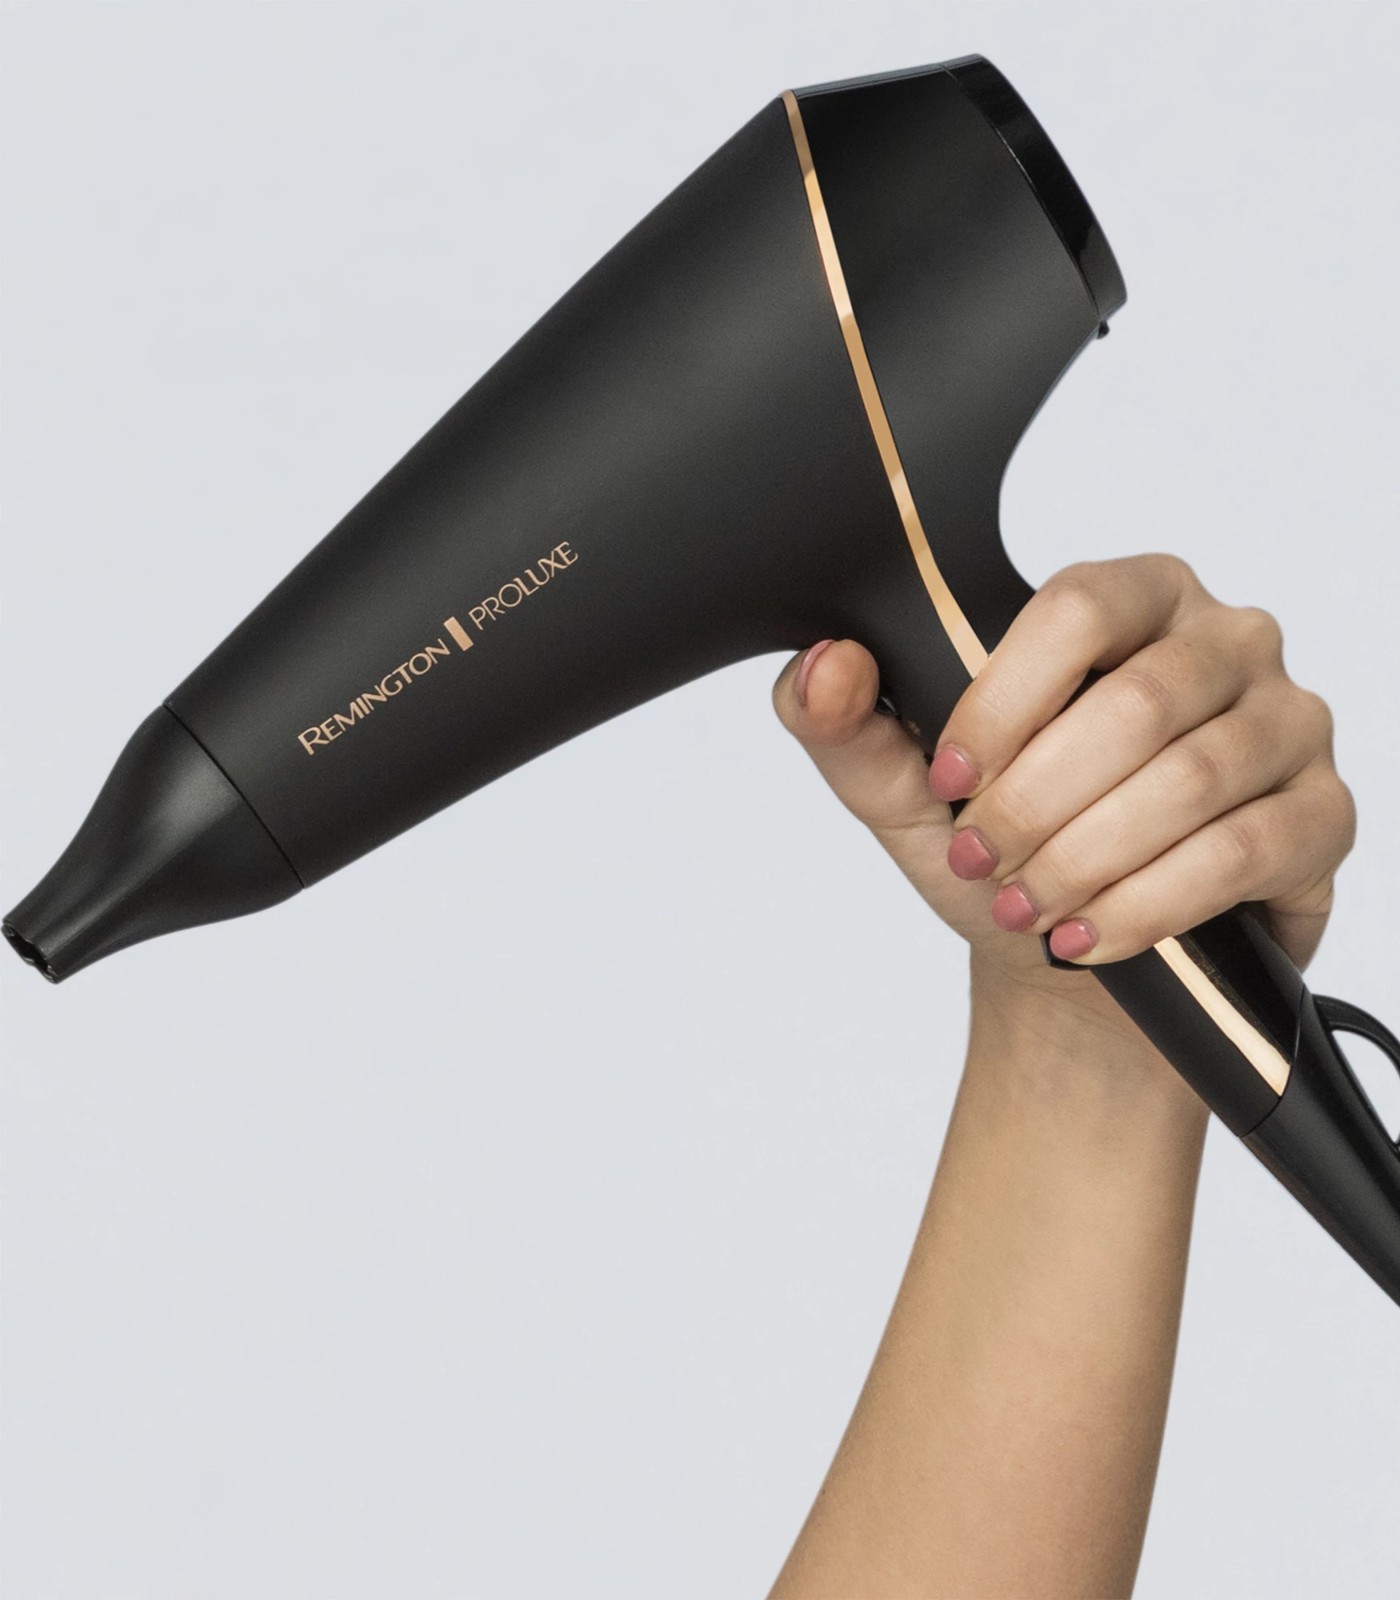 Remington PROluxe Salon Dryer and Straightener Review